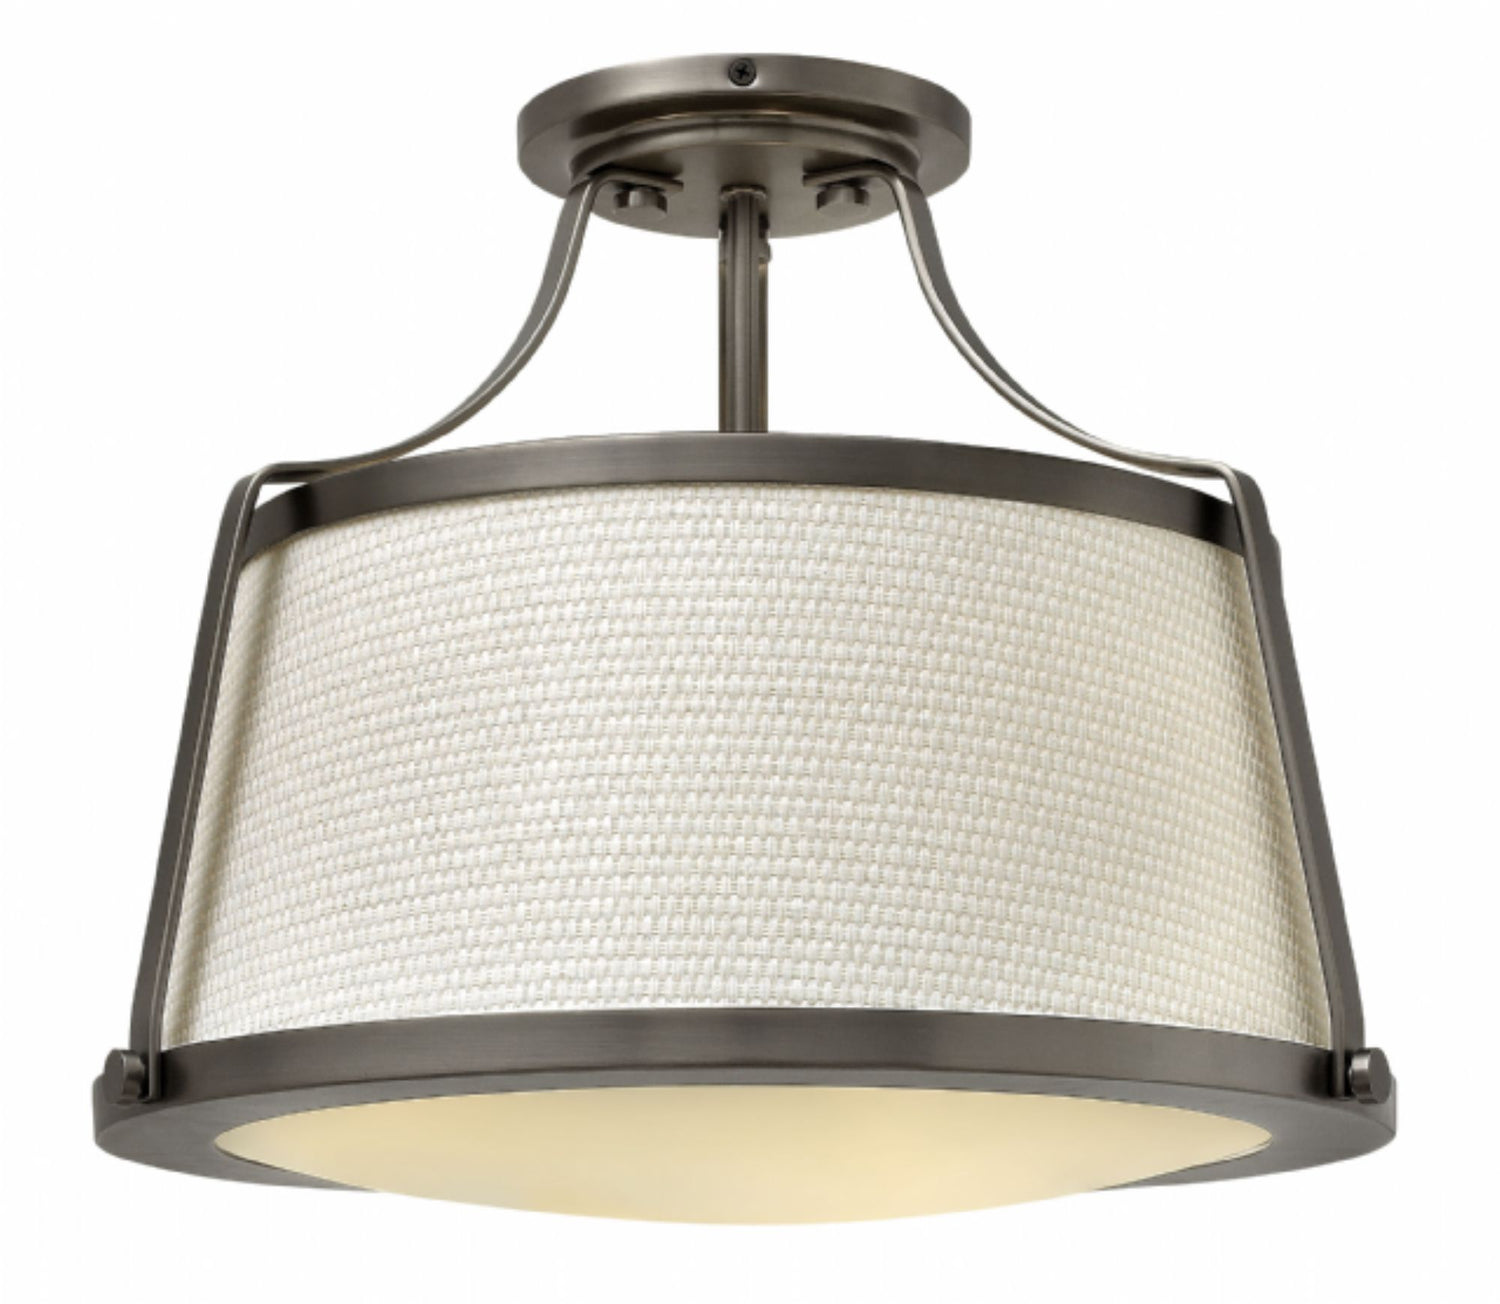 Charlotte 3 Light Semi Flush in Antique Nickel with Woven Off-White Fabric Shade by Hinkley Lighting 3521AN